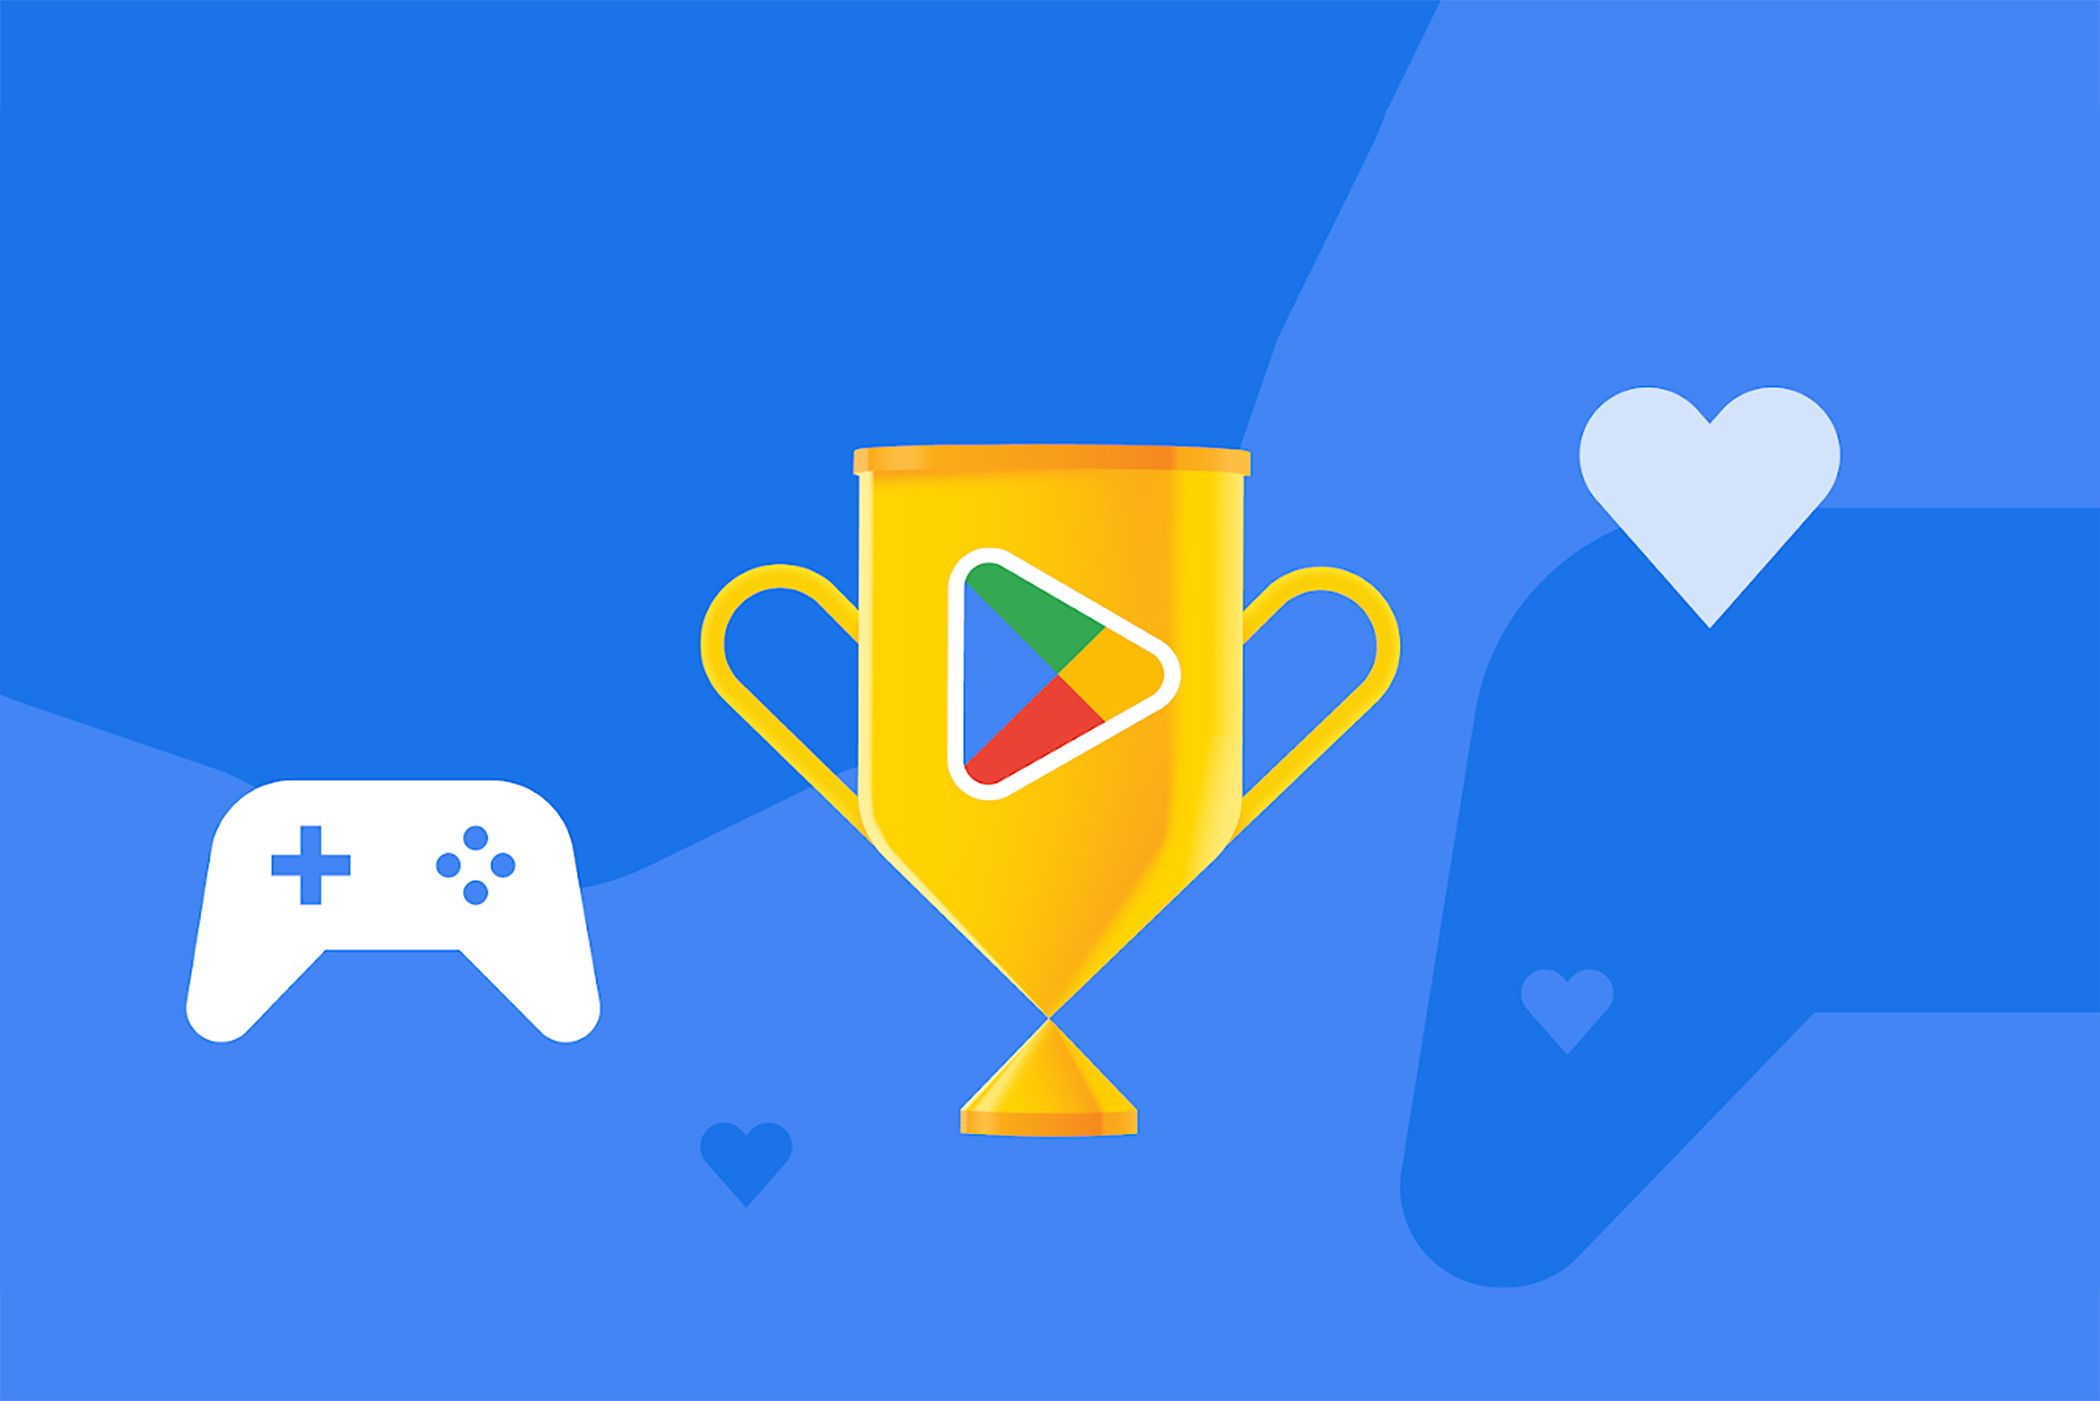 Google Play's Best of 2022: Here are the top Android apps and